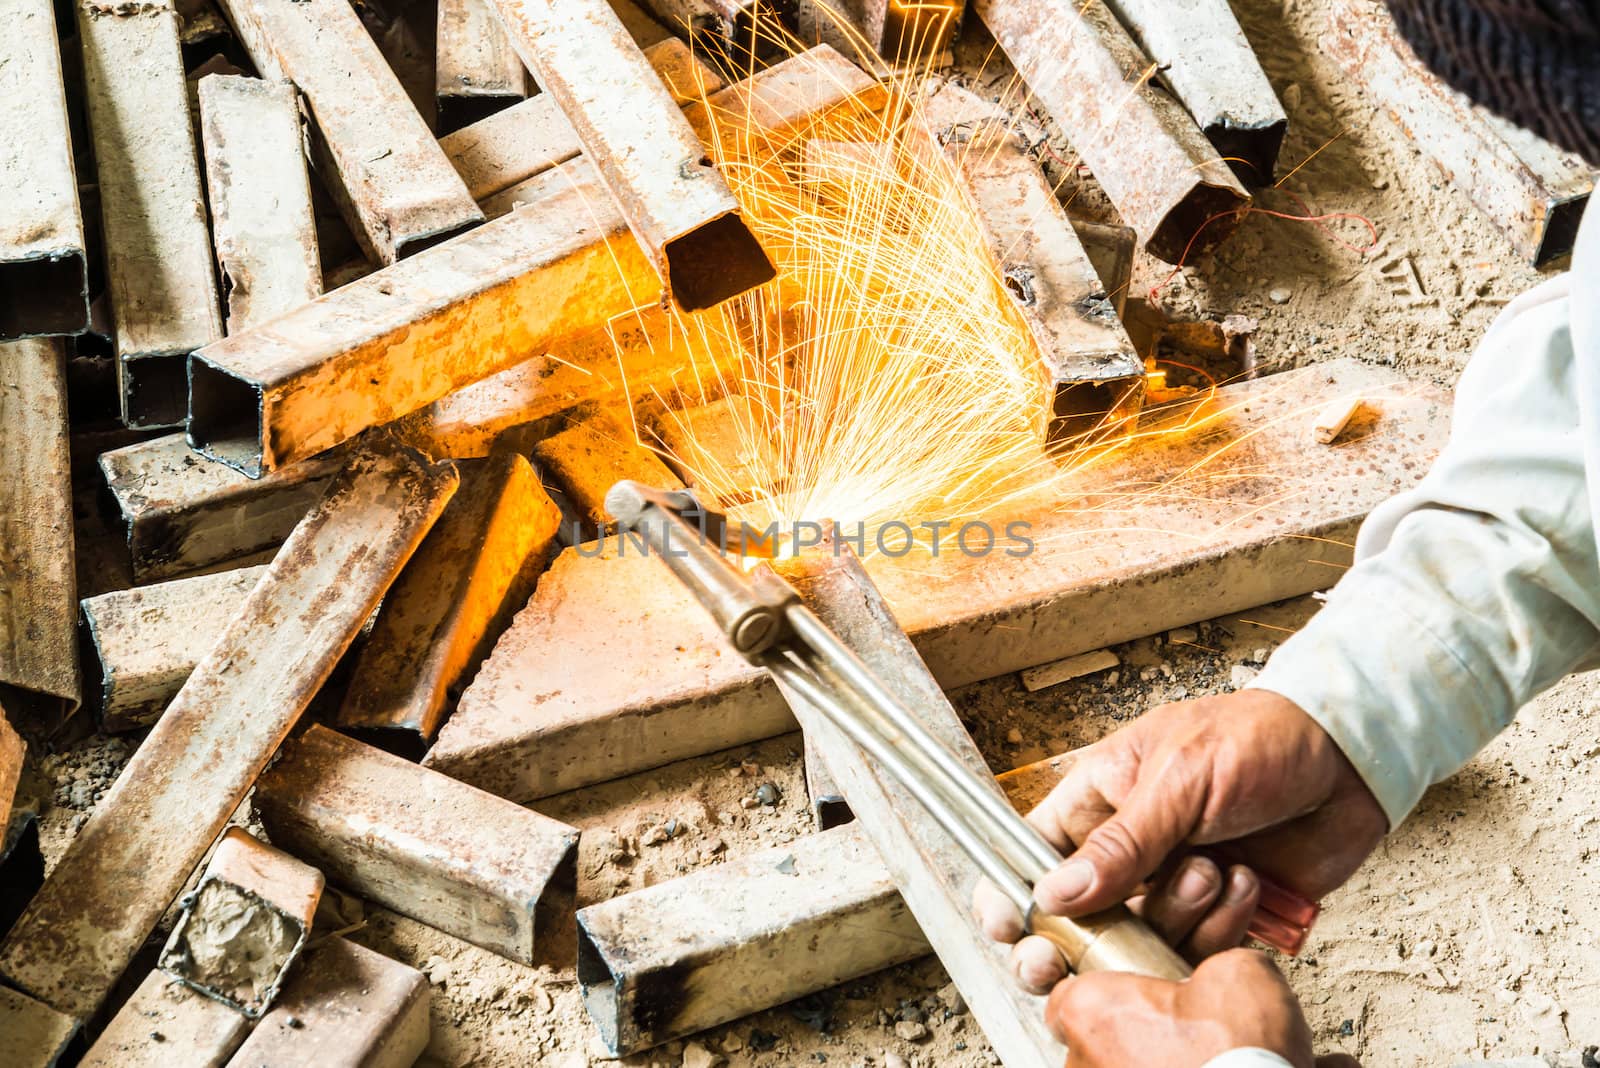 metal cutting with acetylene torch by wmitrmatr